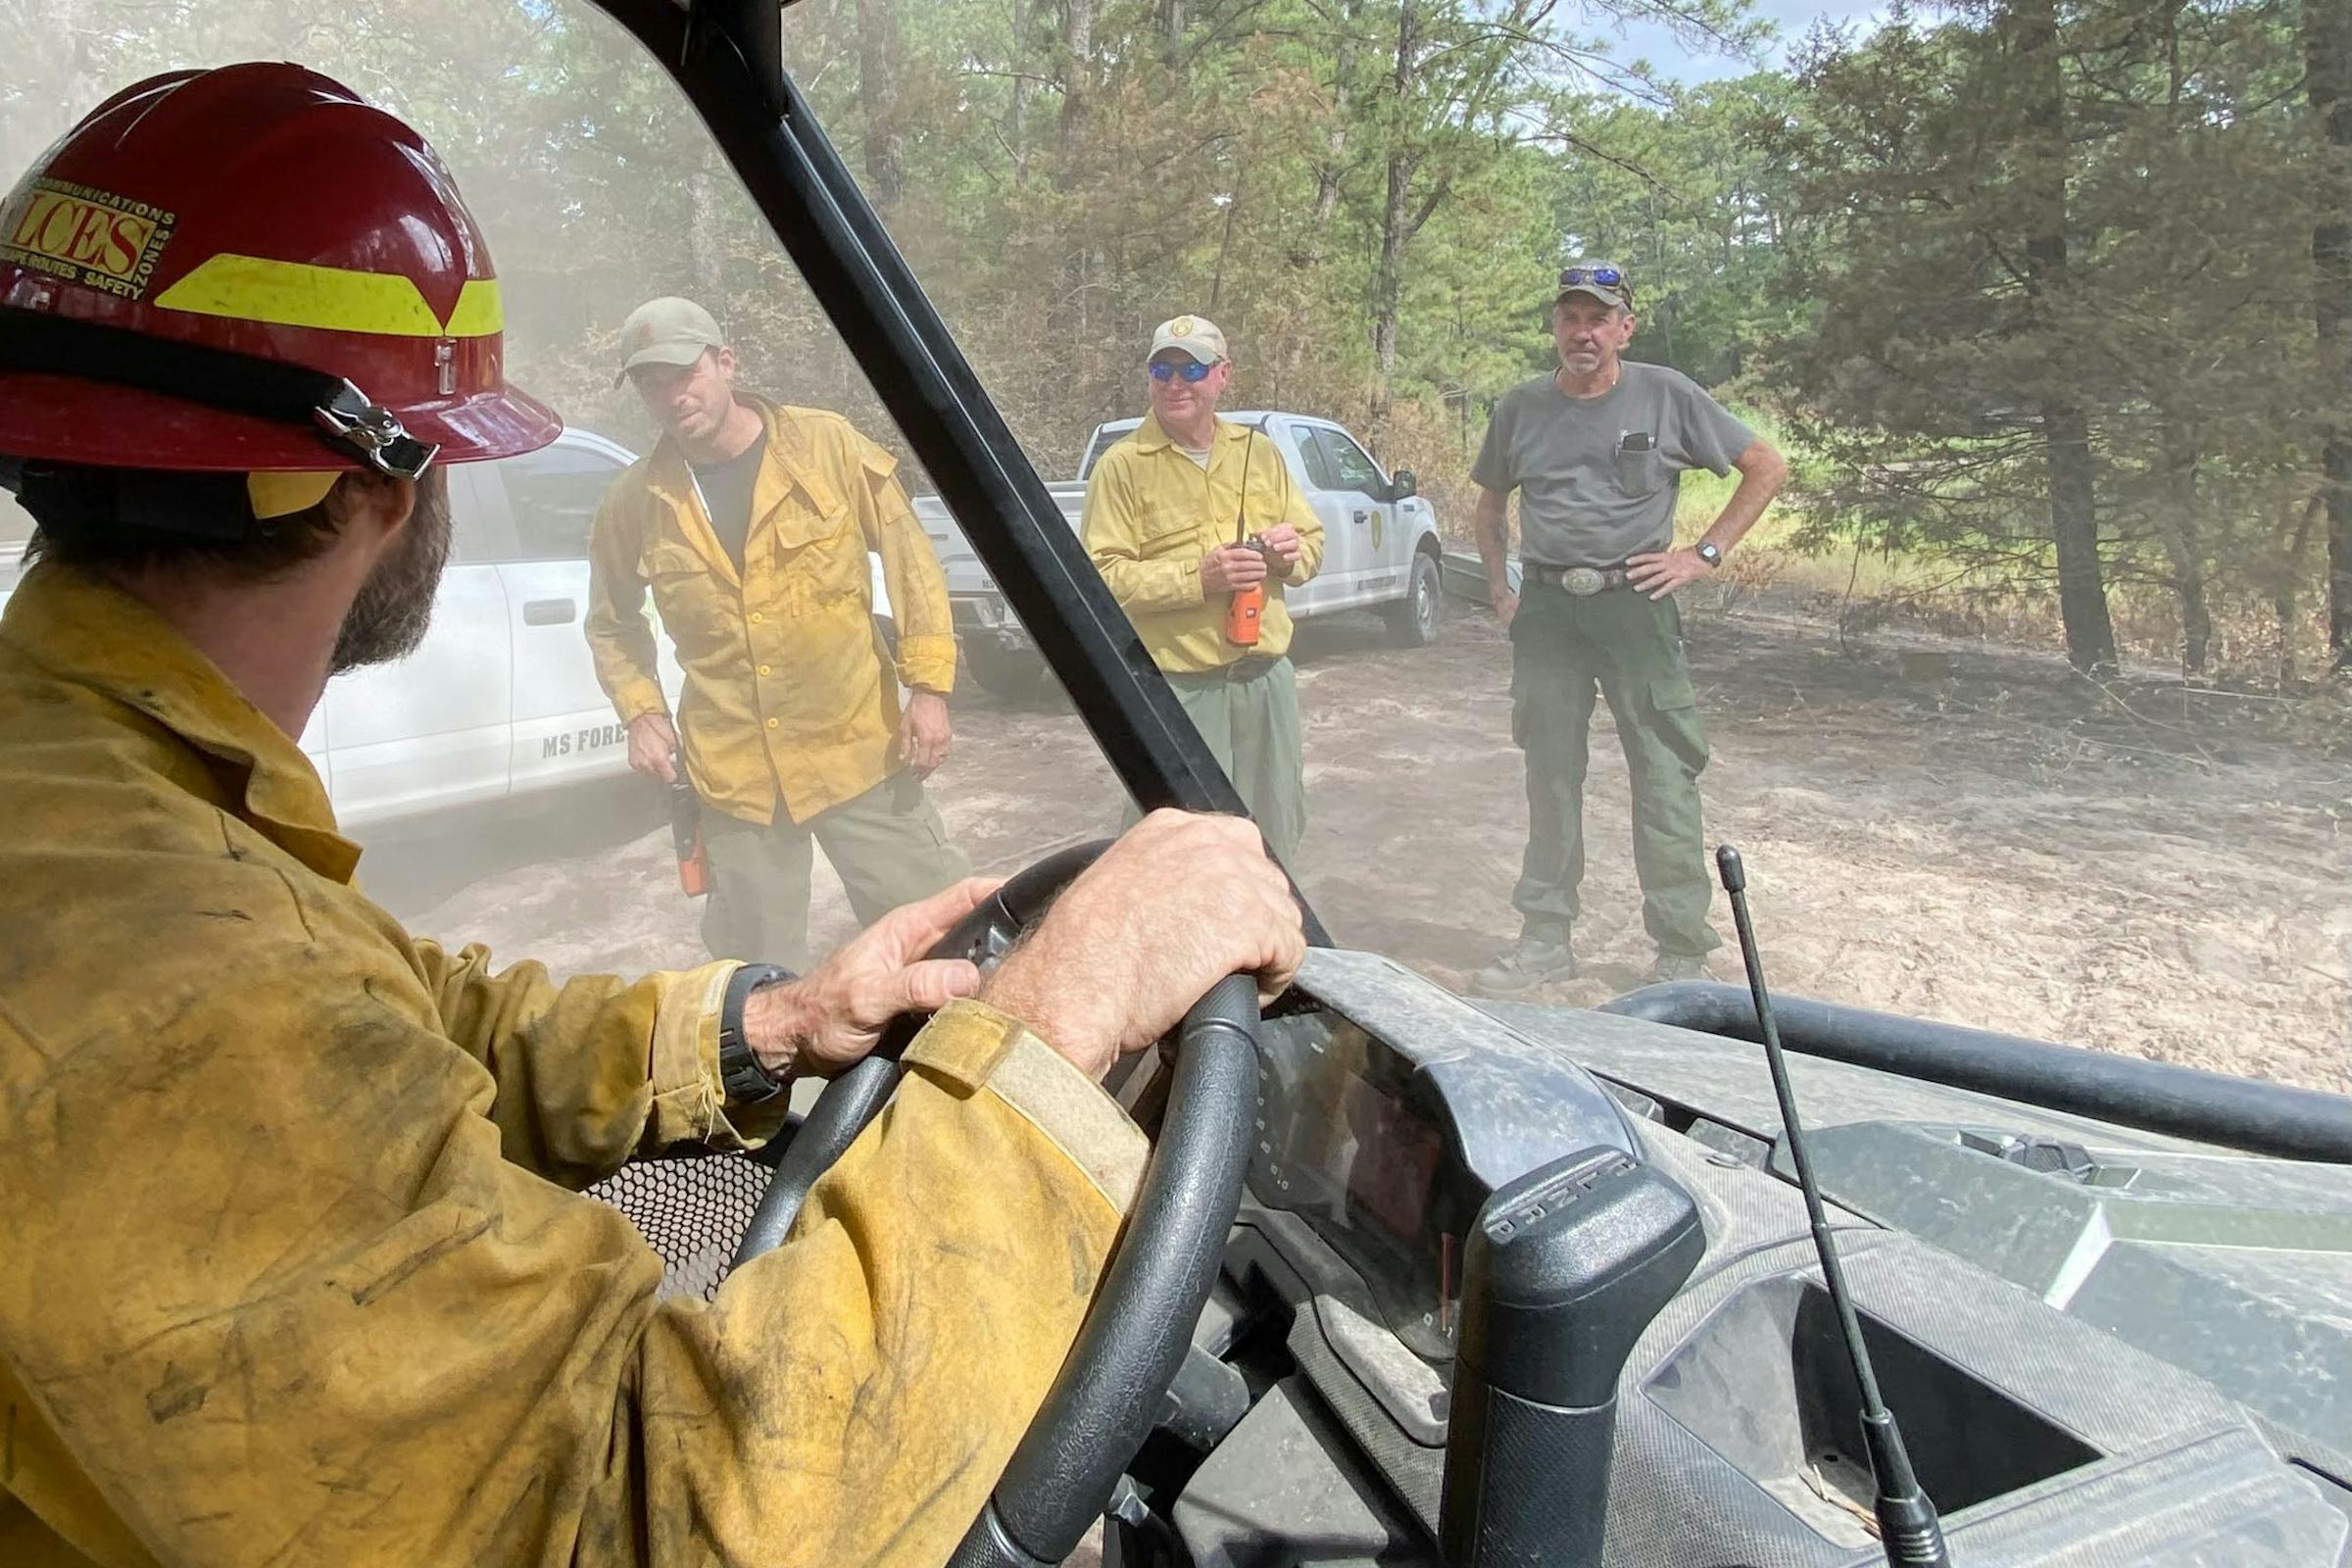 Firefighter at wheel of vehicle consults with colleagues outdoors